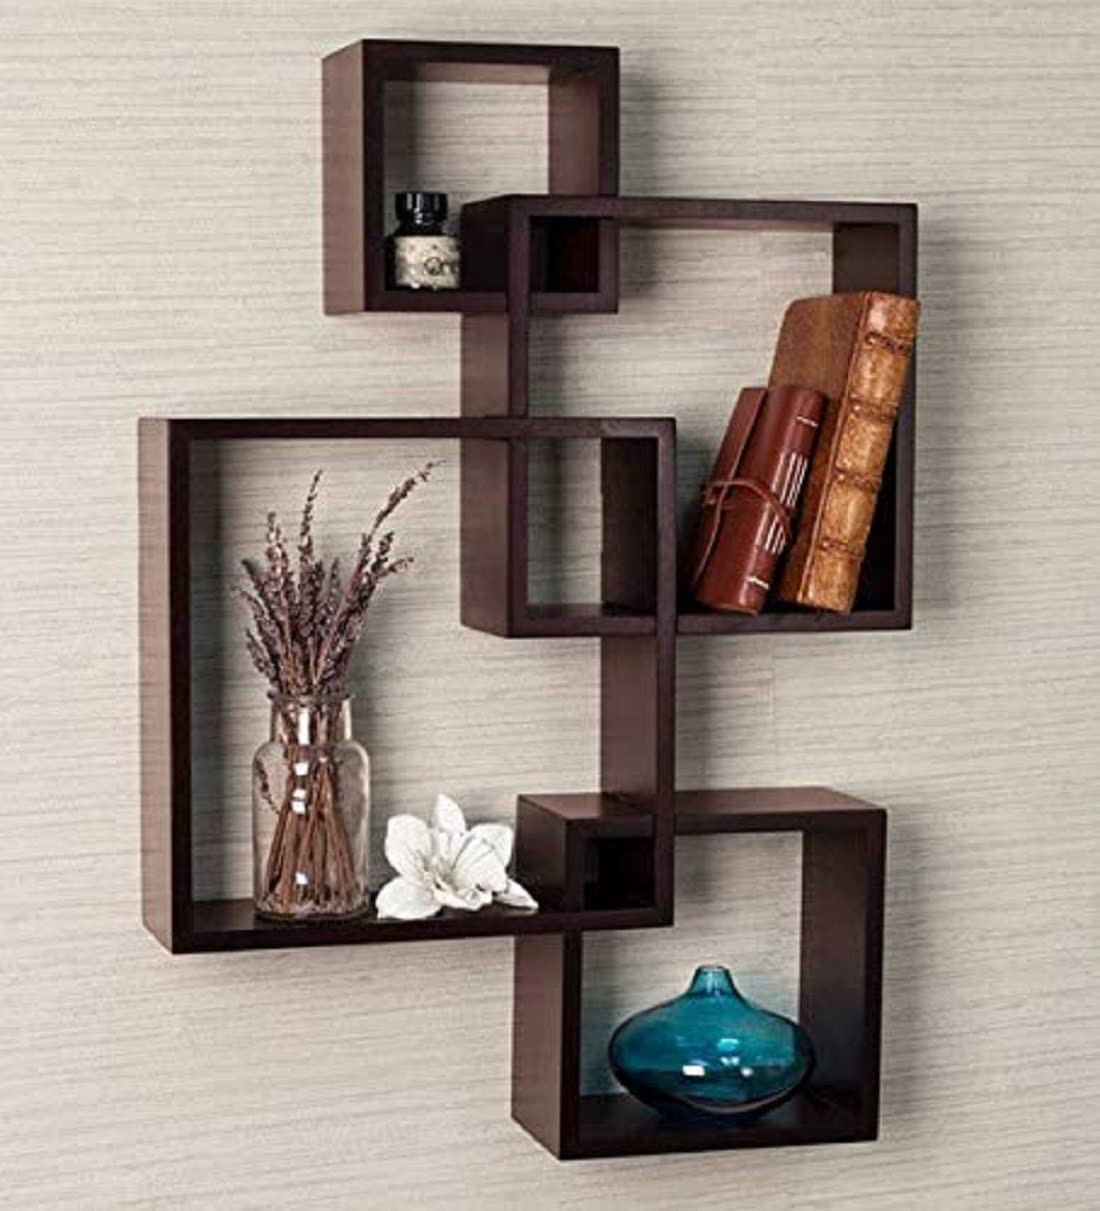 Kuber Industries Wall Shelves|Handicraft Wooden Intersecting Wall Rack|Floating Shelves Wall DÃ©cor for Living Room,Office,Set of 4,(Brown)